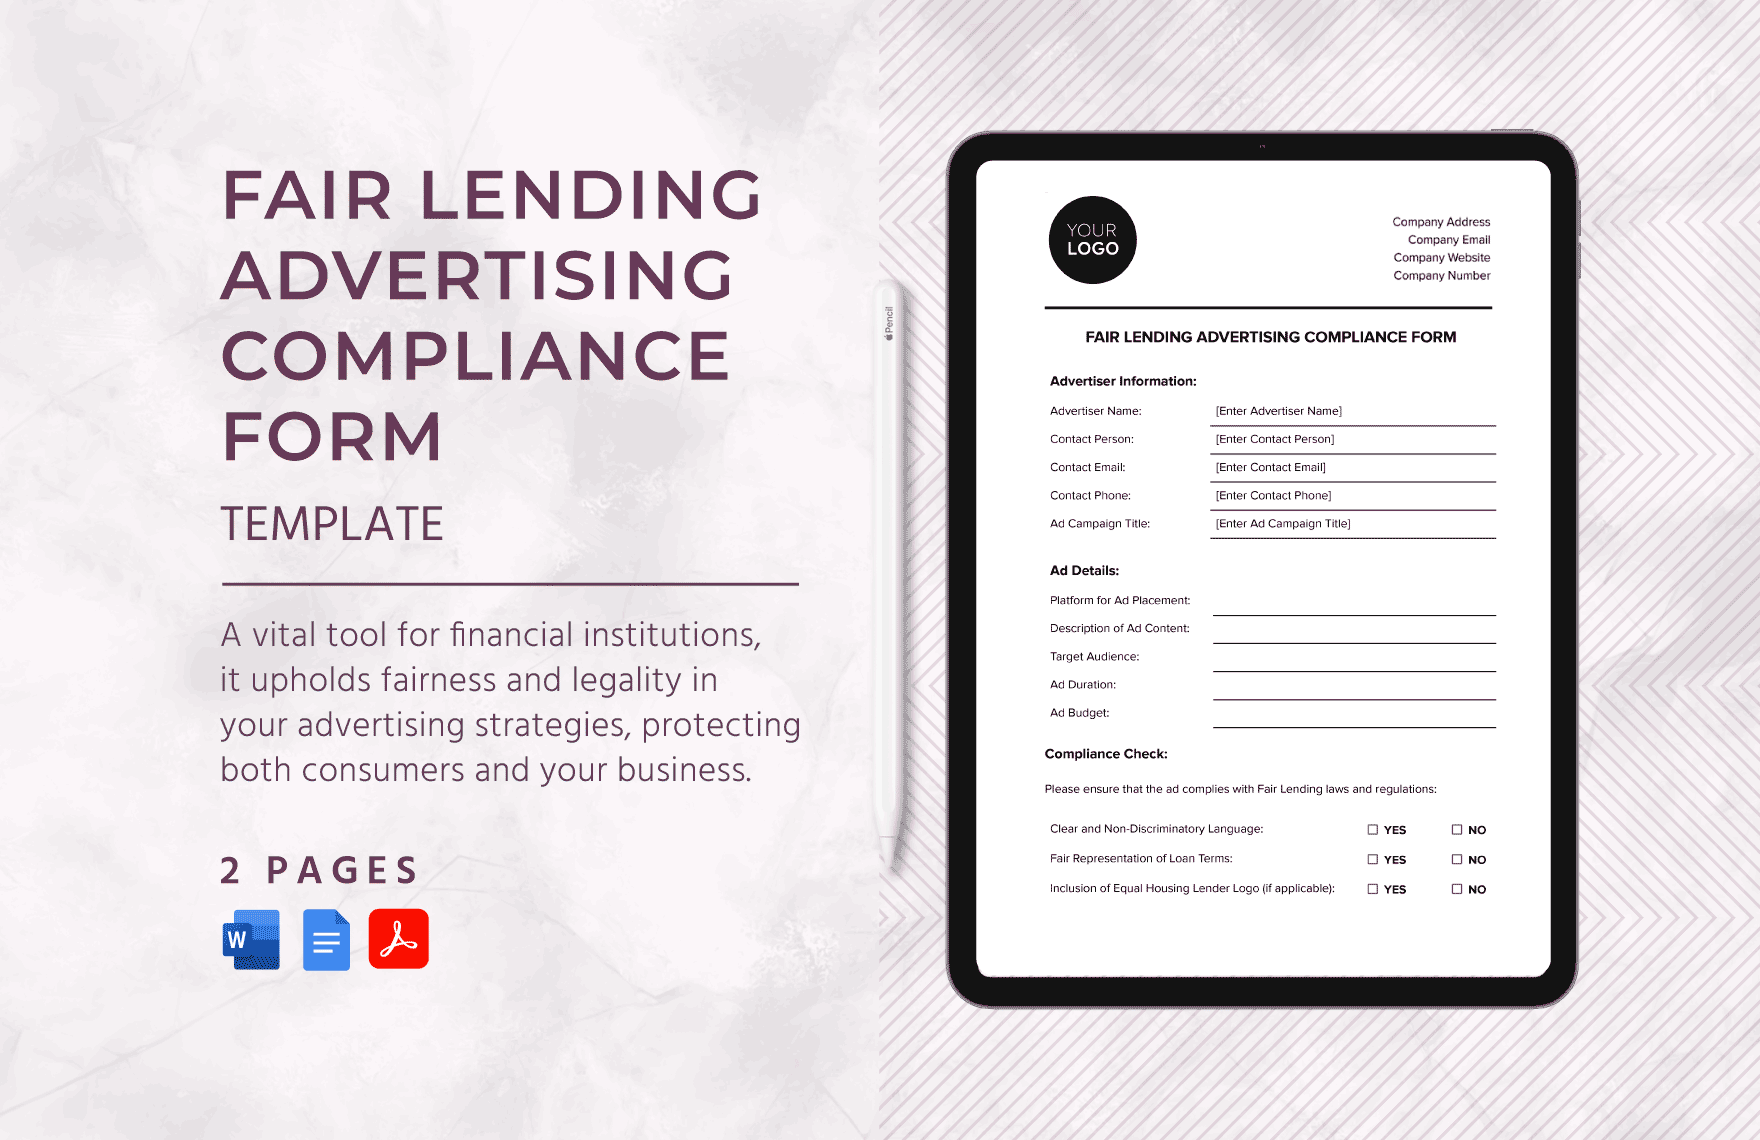 Fair Lending Advertising Compliance Form Template in Word, Google Docs, PDF